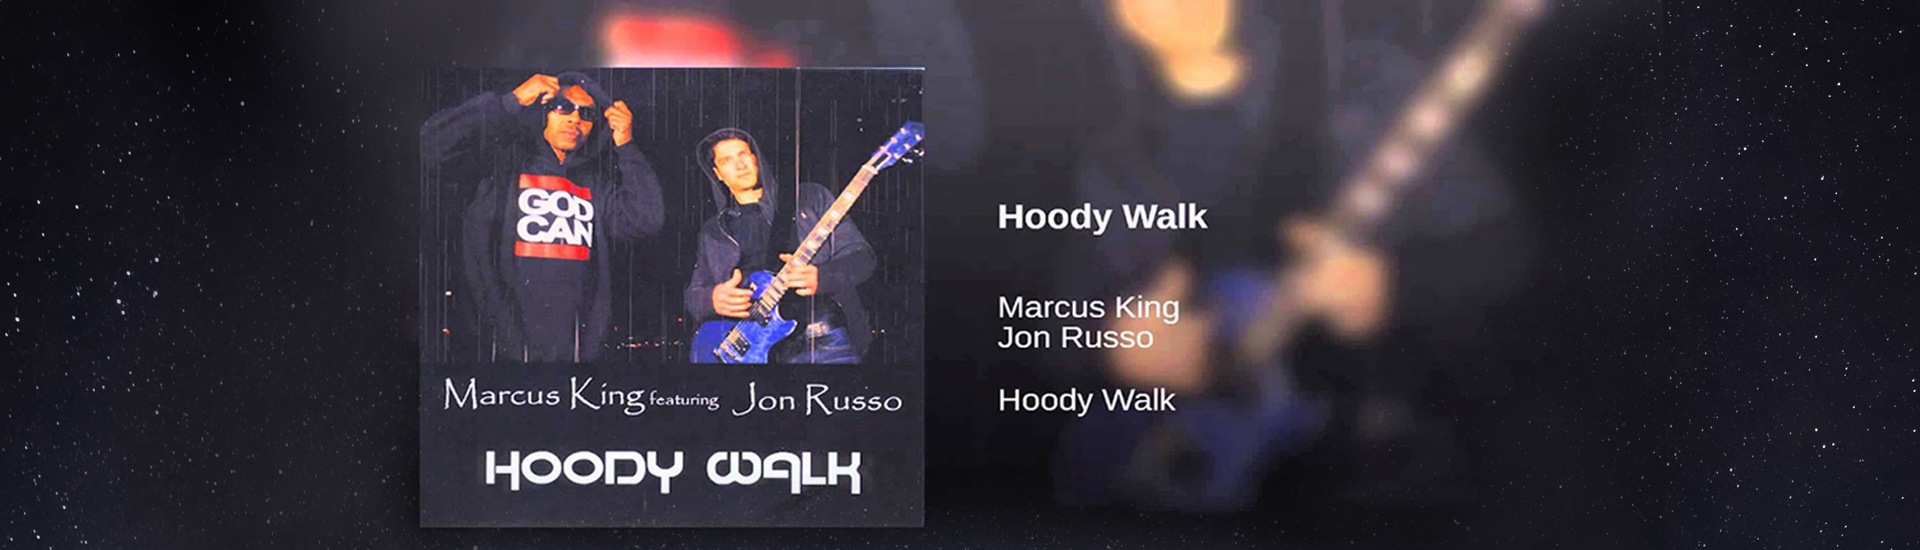 Hoody Walk Poster with Night Sky Background